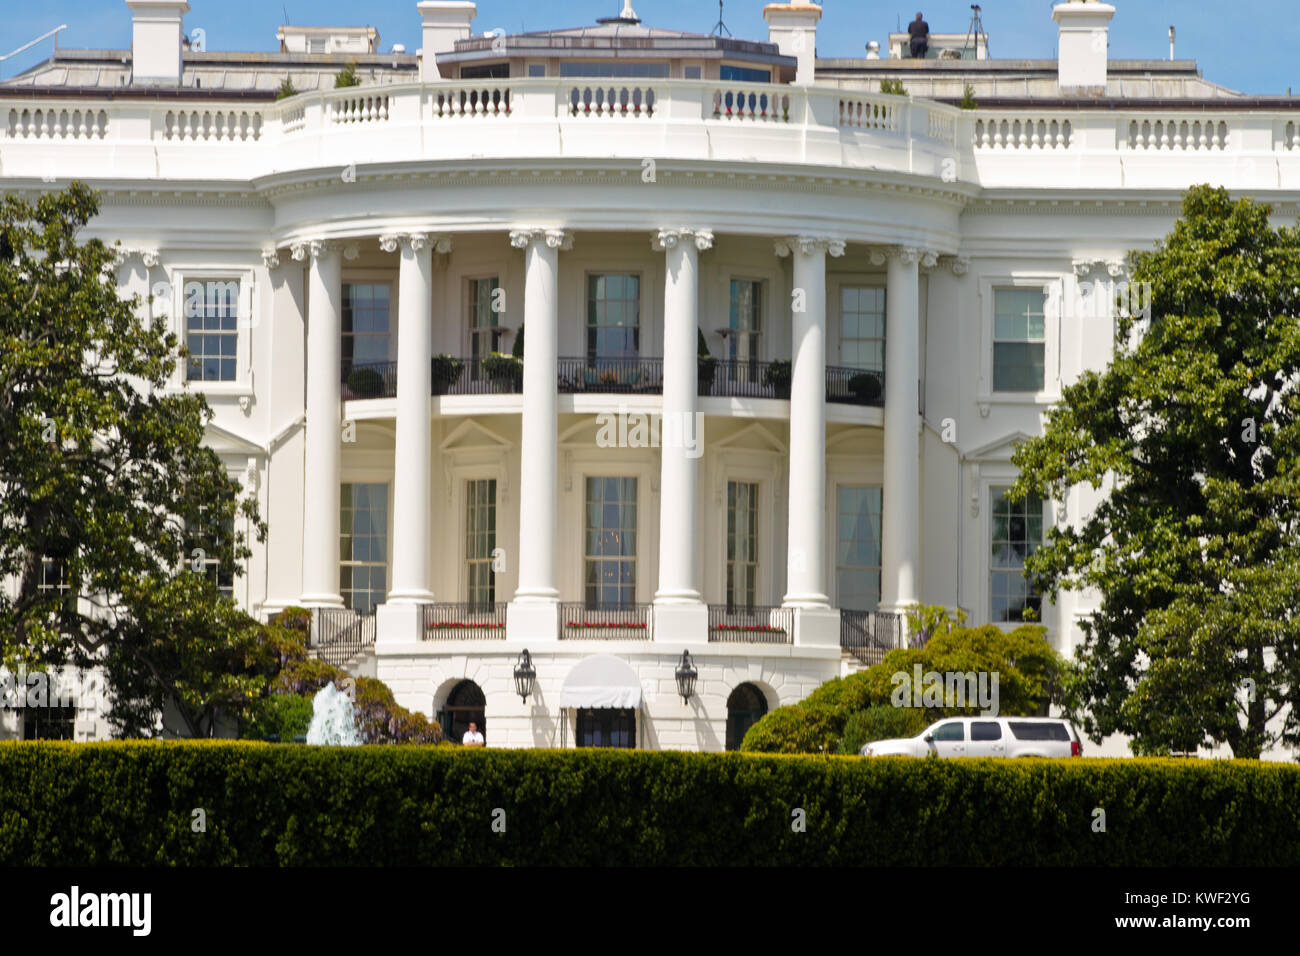 The White House is the official residence and workplace of the President of the United States. It is located at 1600 Pennsylvania Avenue in Washington Stock Photo